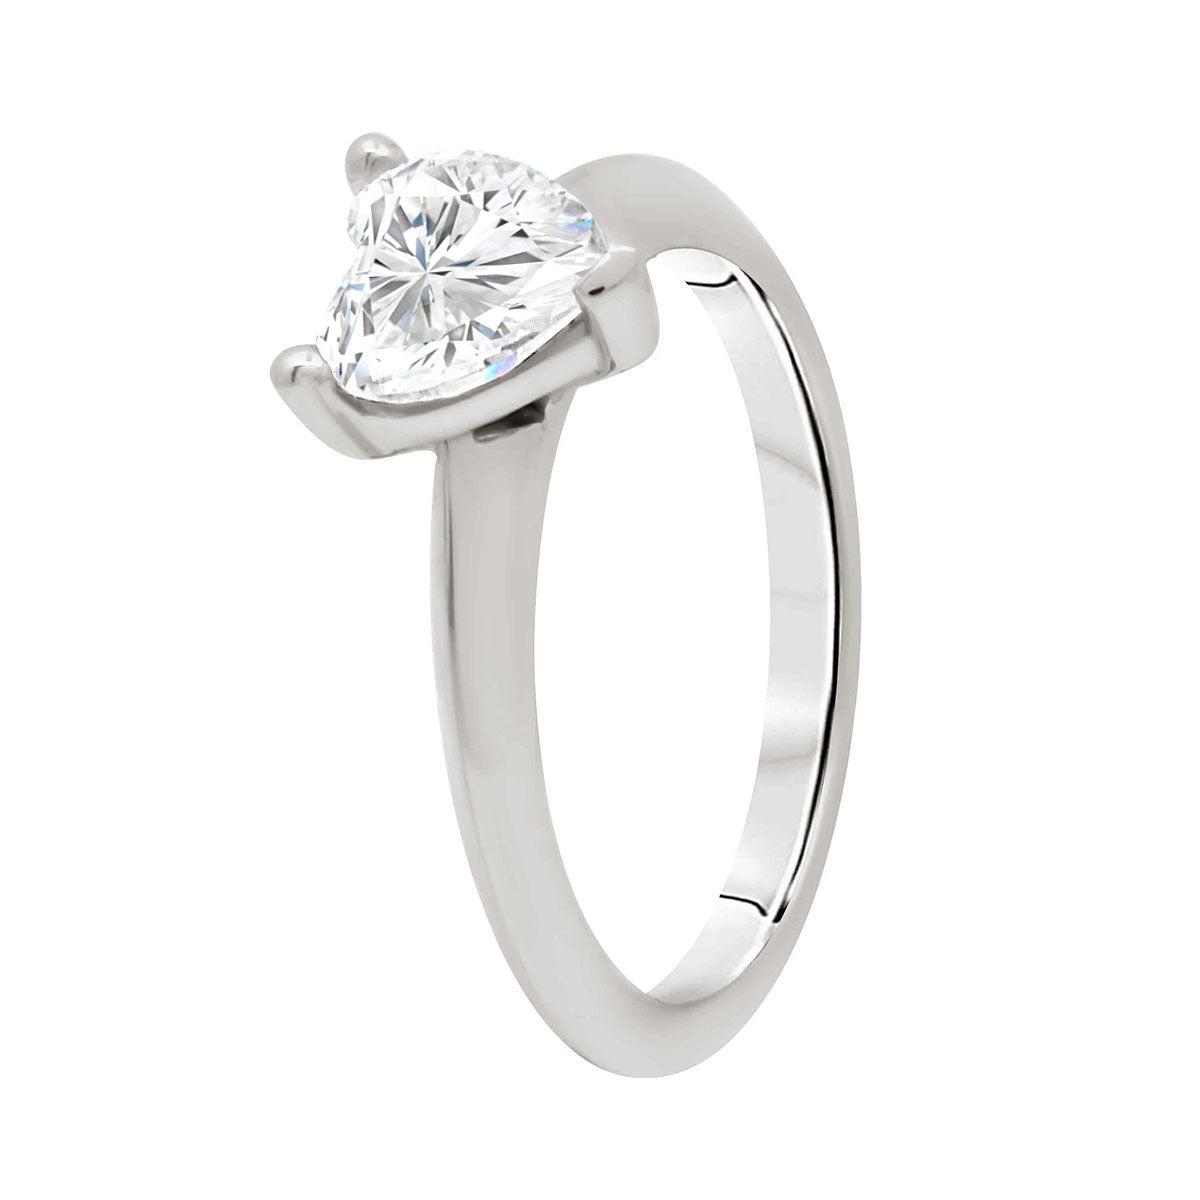 Heart Shape Diamond Ring IN WHITE GOLD in angled upright aspect